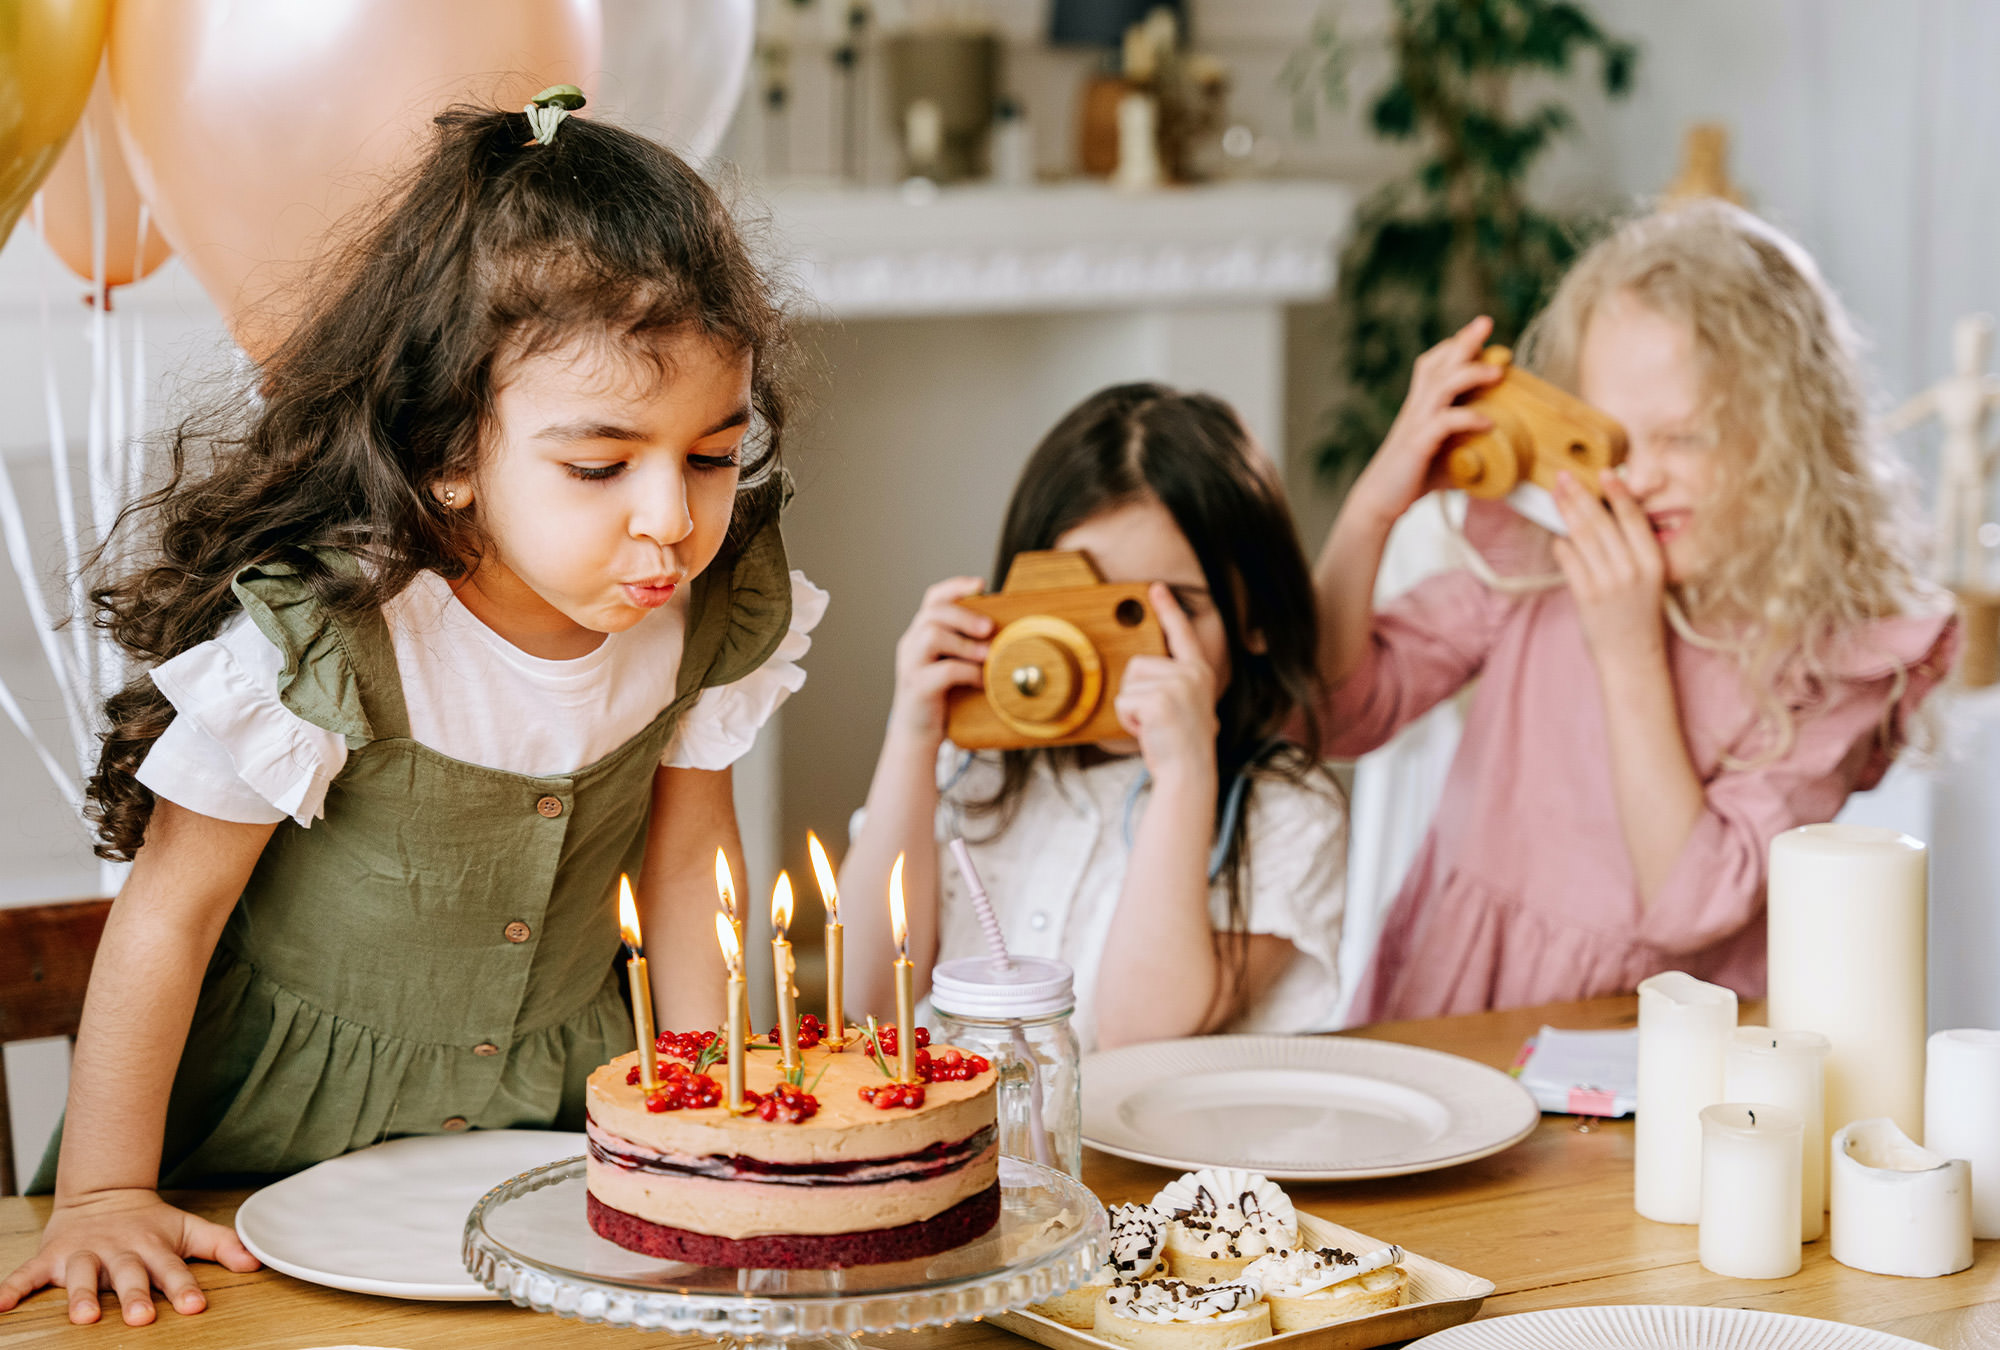 Young girl blowing out candles of birthday cake